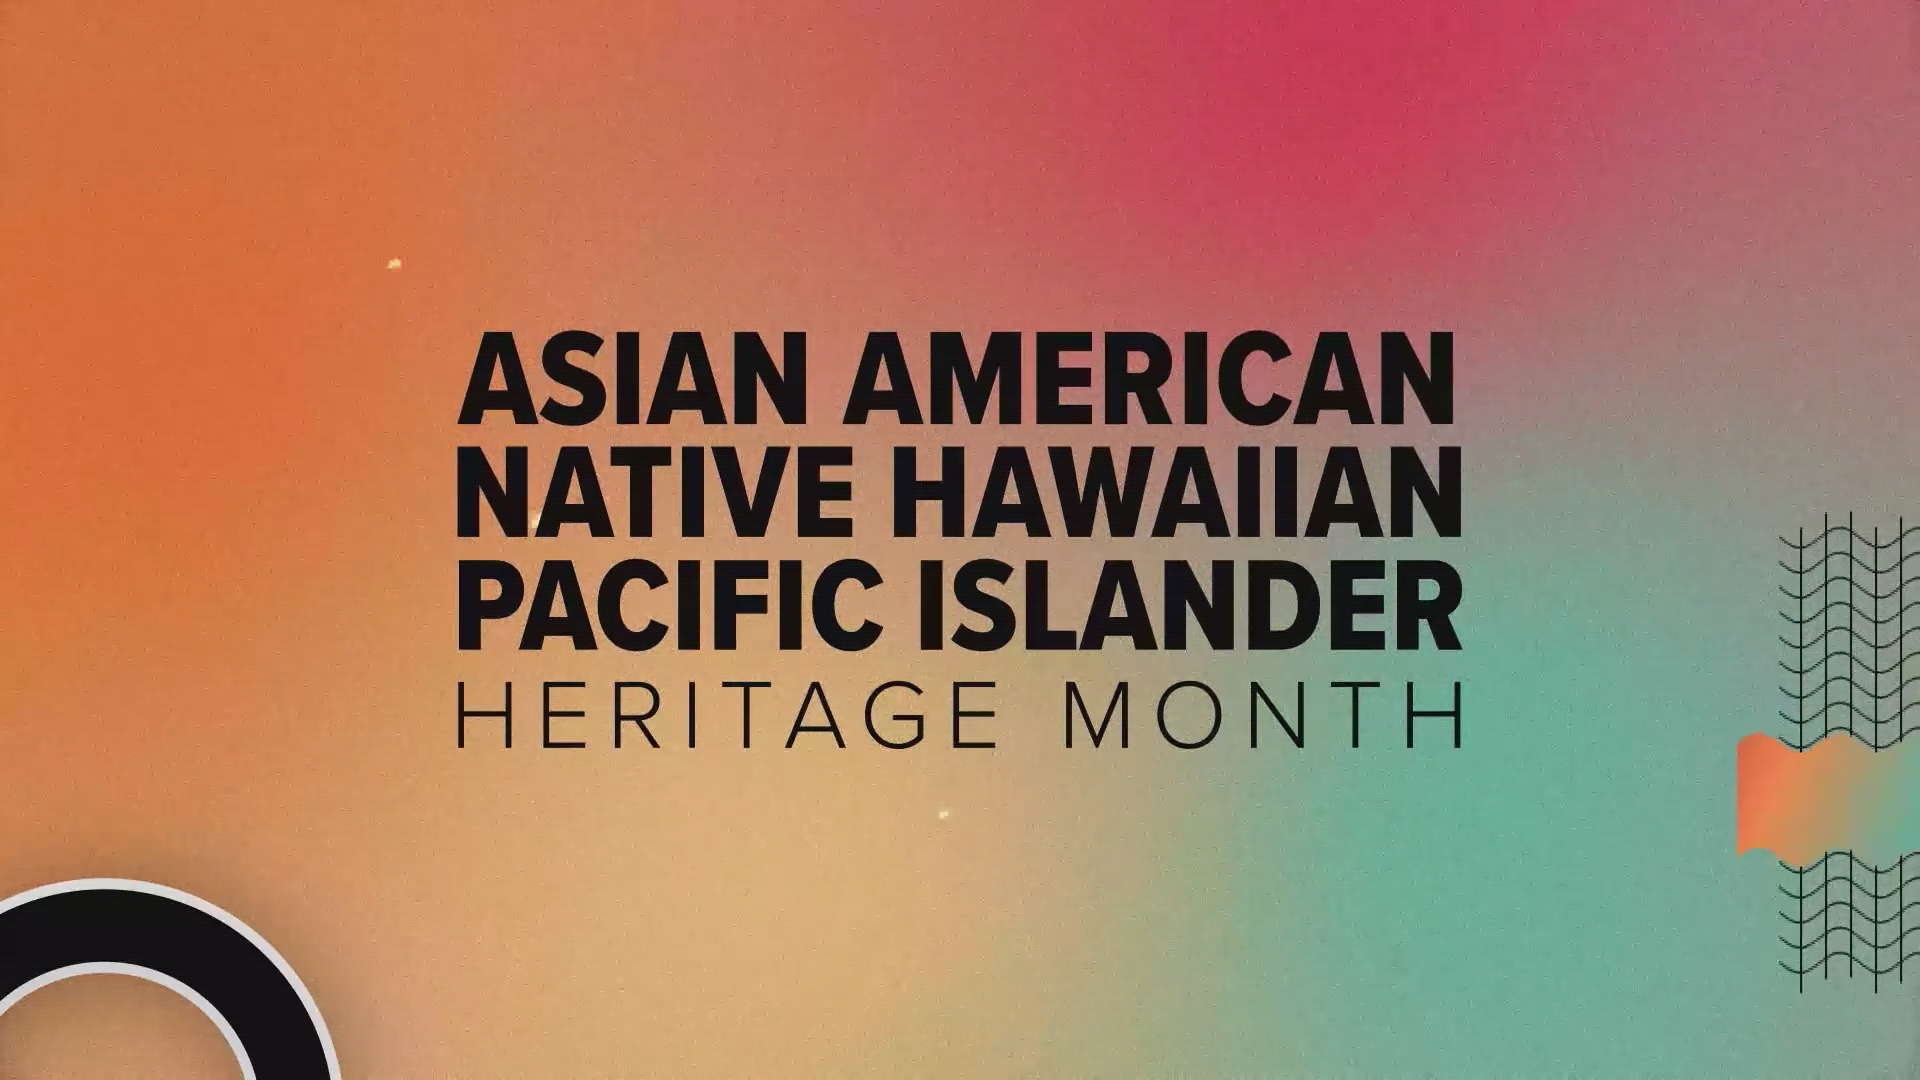 May is Asian American Native Hawaiian Pacific Islander Heritage Month. It commemorates the contributions AANHPI people have made to U.S. history, society and culture